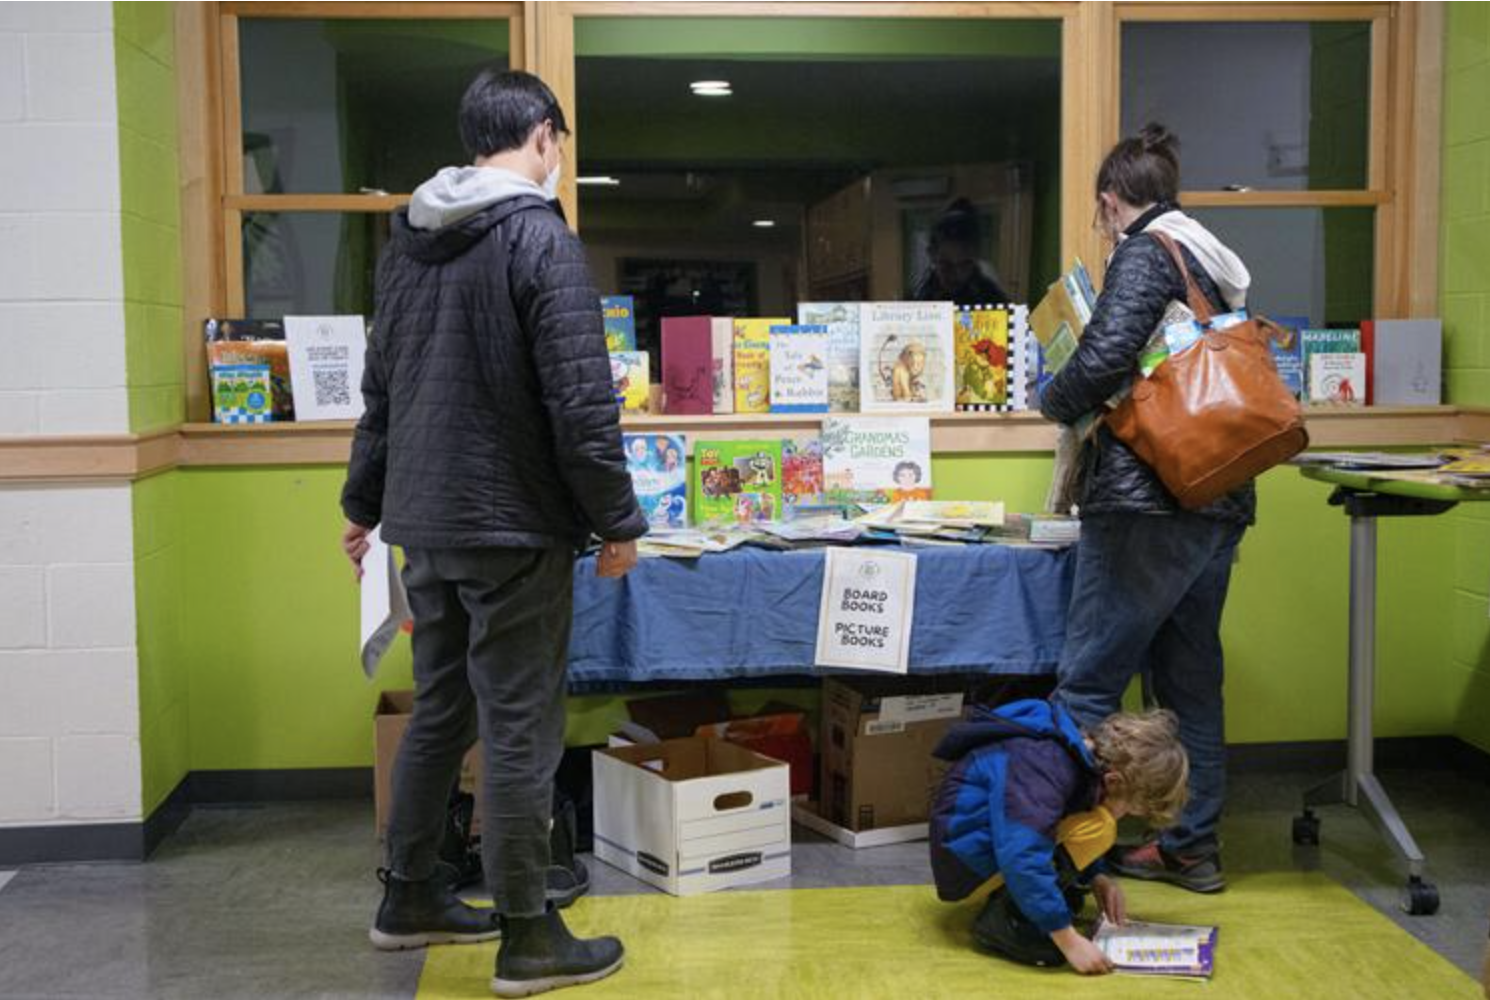  Three visitors at the Read-a-thon look at books at the Shelburne Community School on Feb.9.&nbsp;  Photo by Aylin Kursat. 